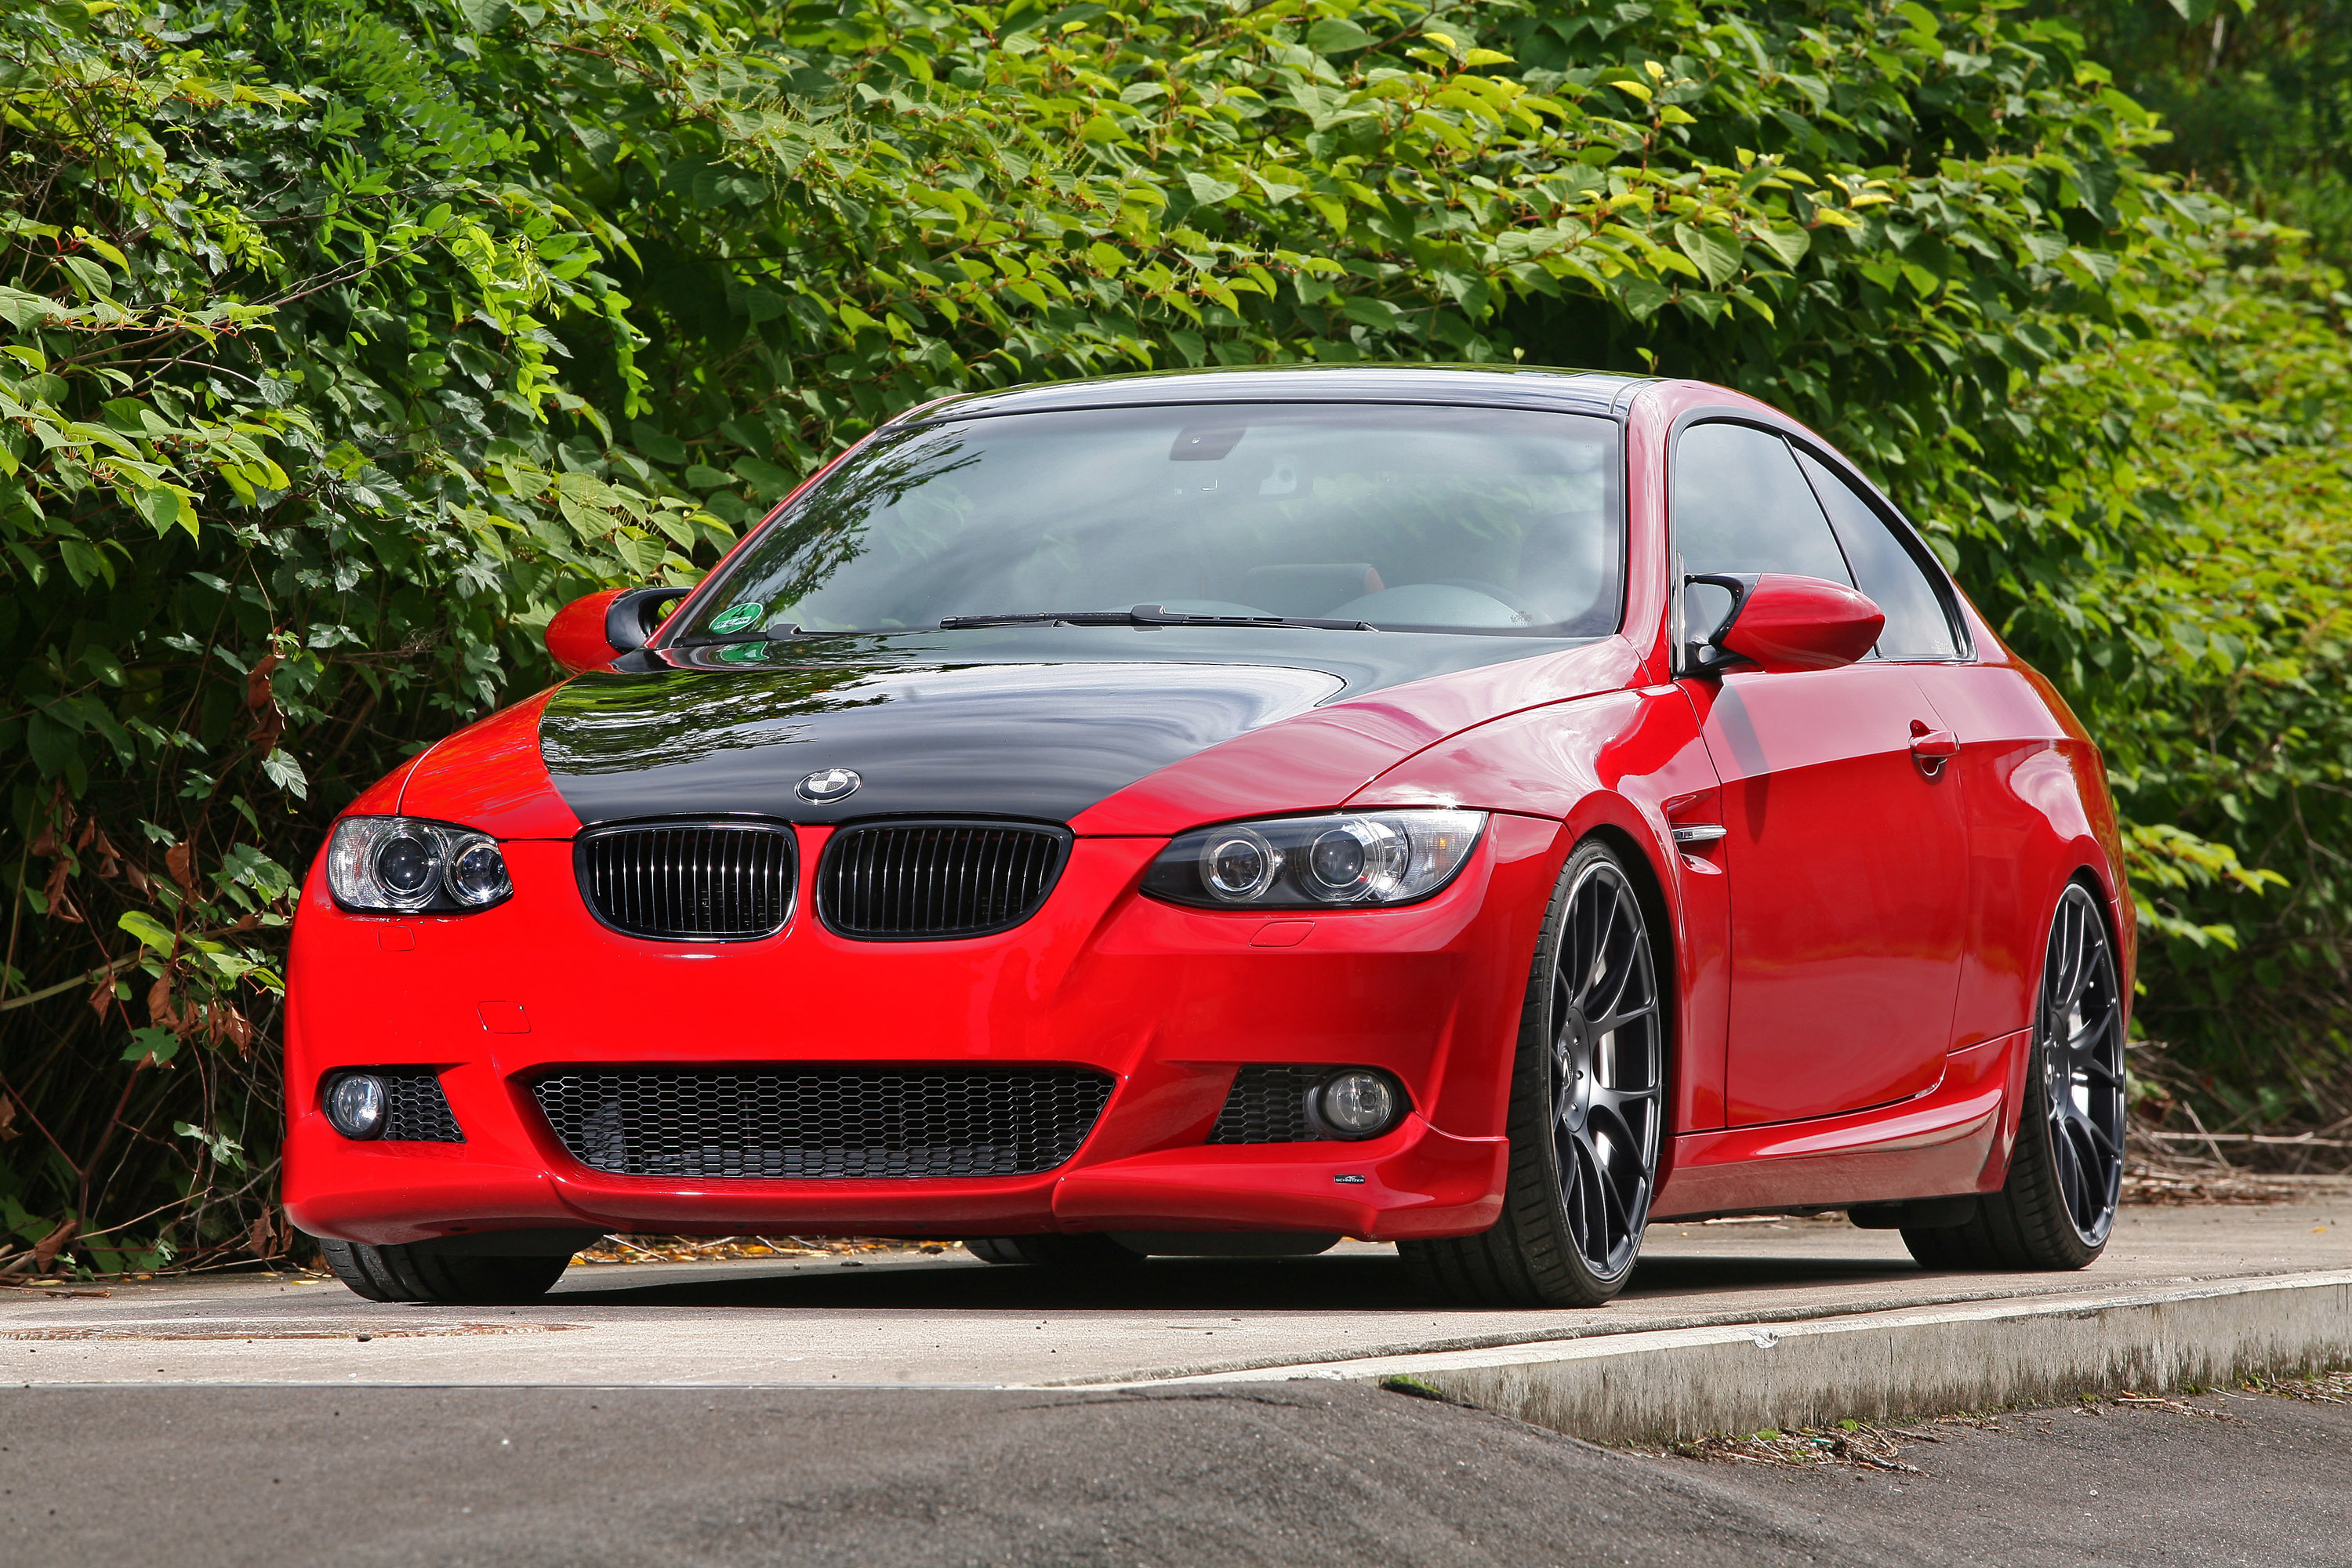 Tuning Concepts BMW E92 in Stunning Transformation